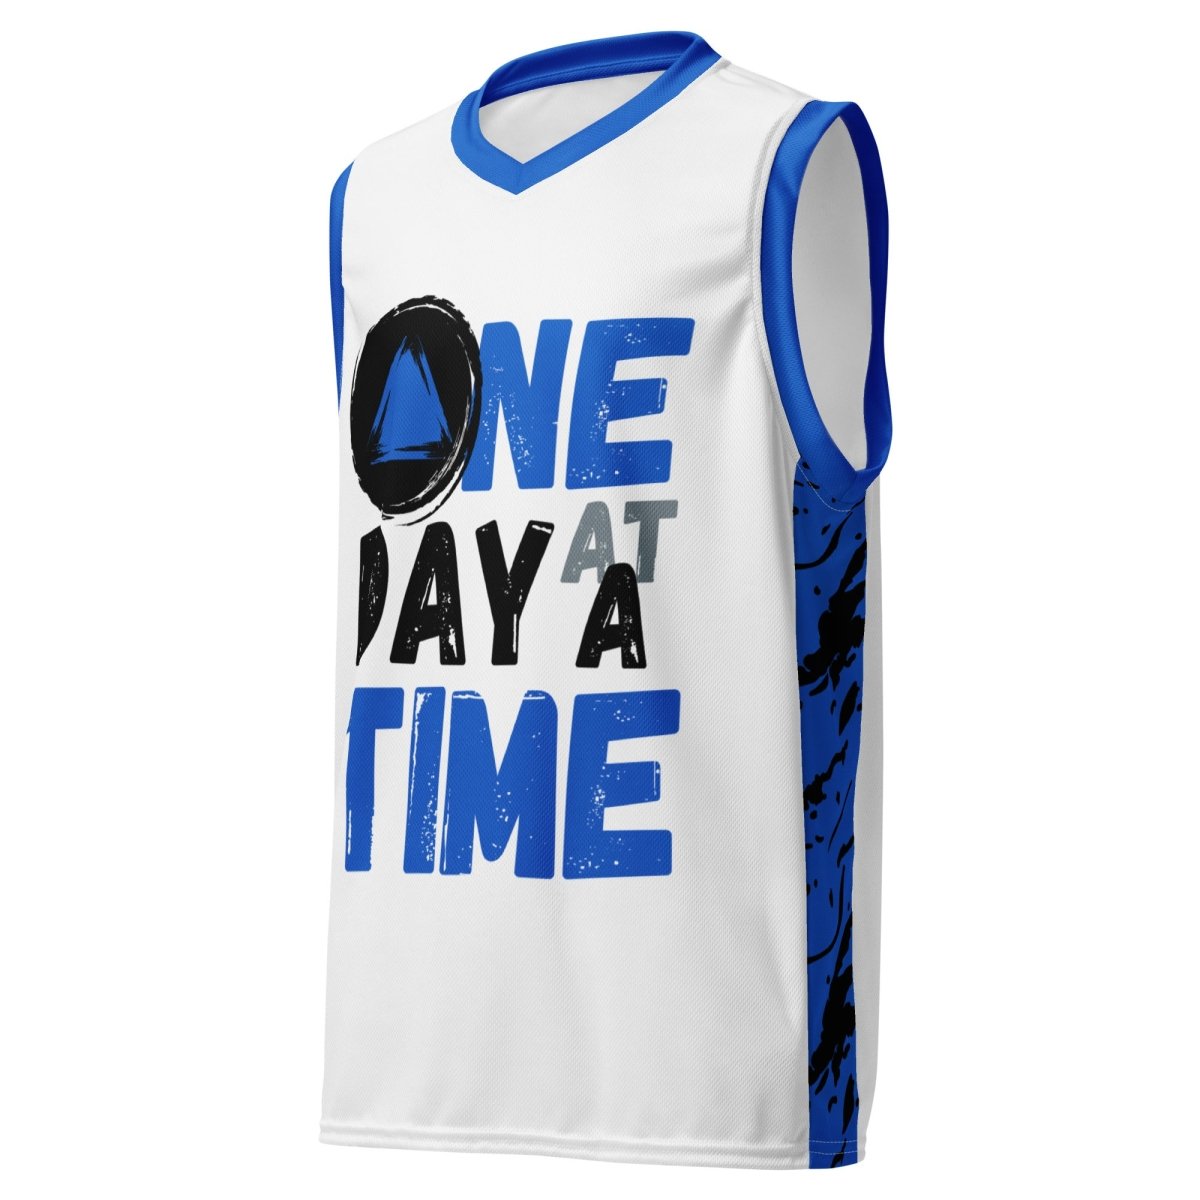 One Day at a Time Unisex Basketball Jersey - 2XS | Sobervation